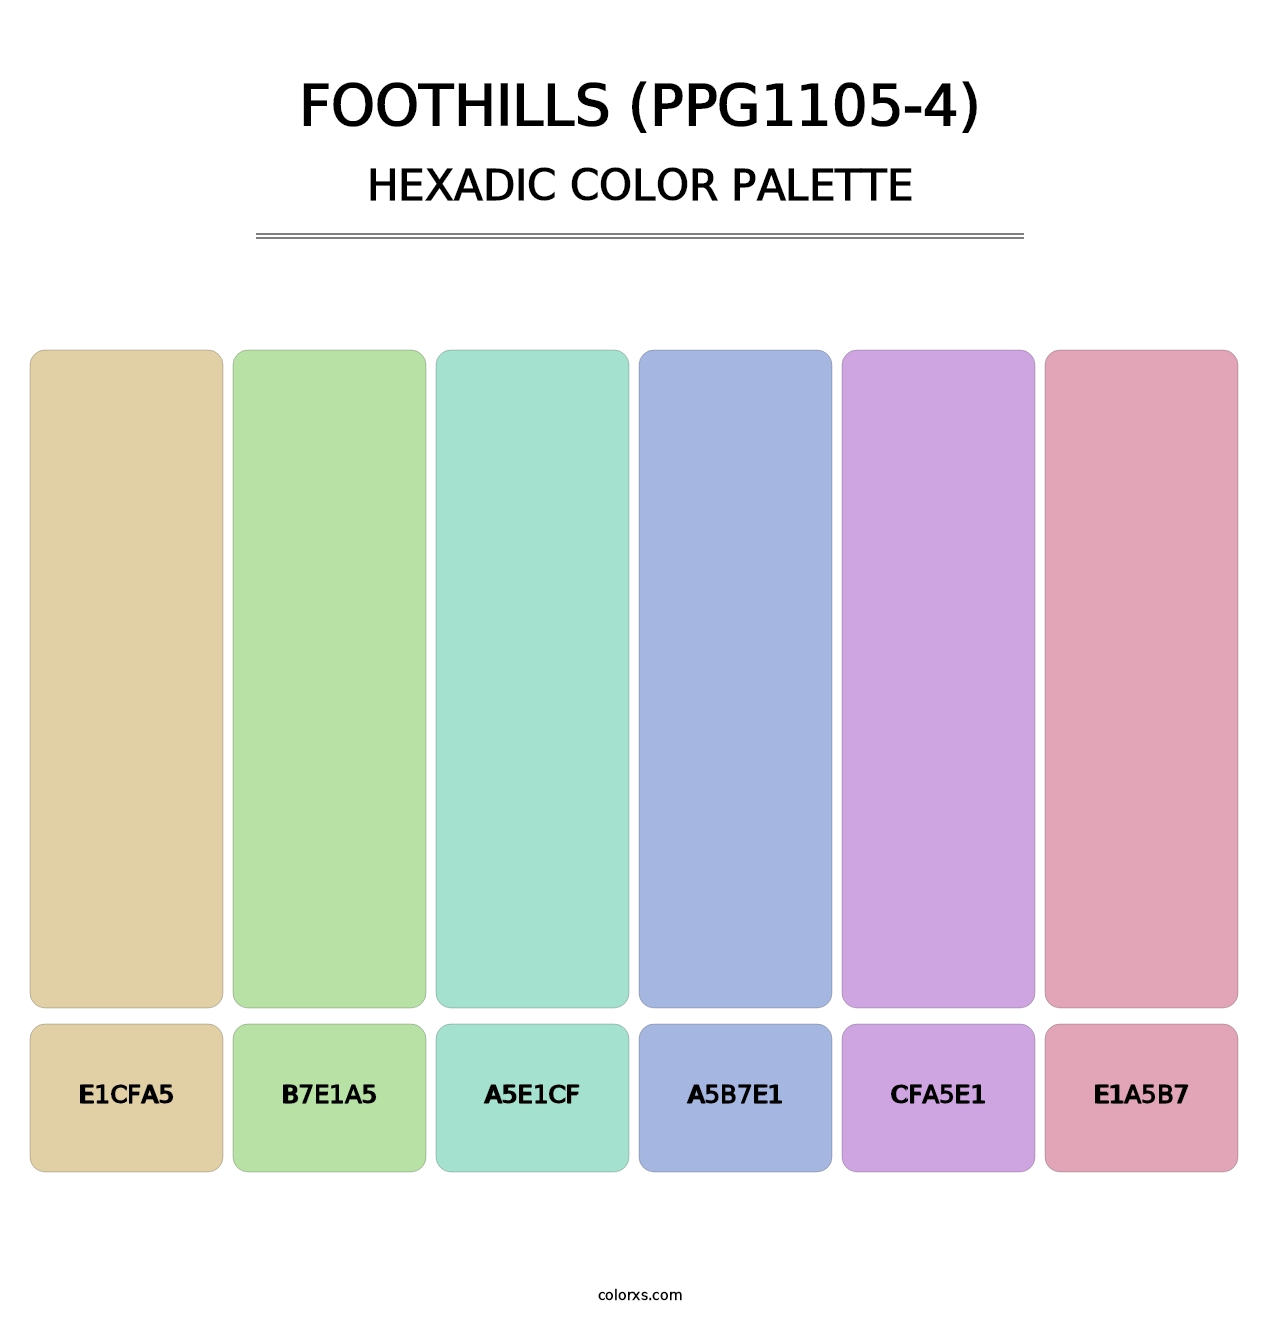 Foothills (PPG1105-4) - Hexadic Color Palette